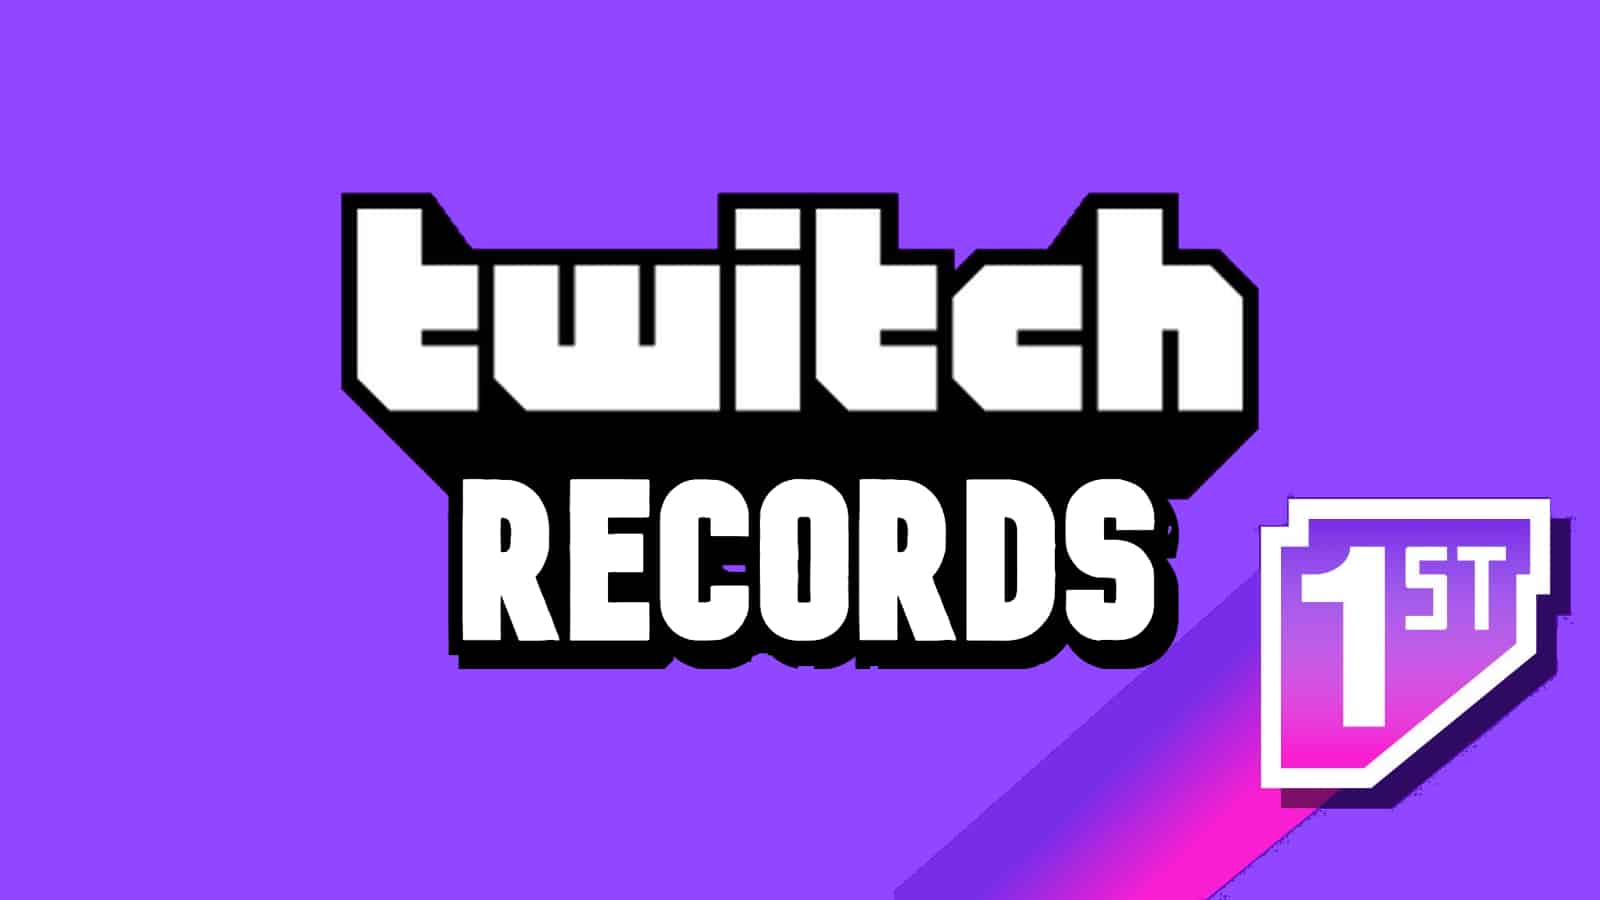 The Best Times to Stream on Twitch - For Max Growth